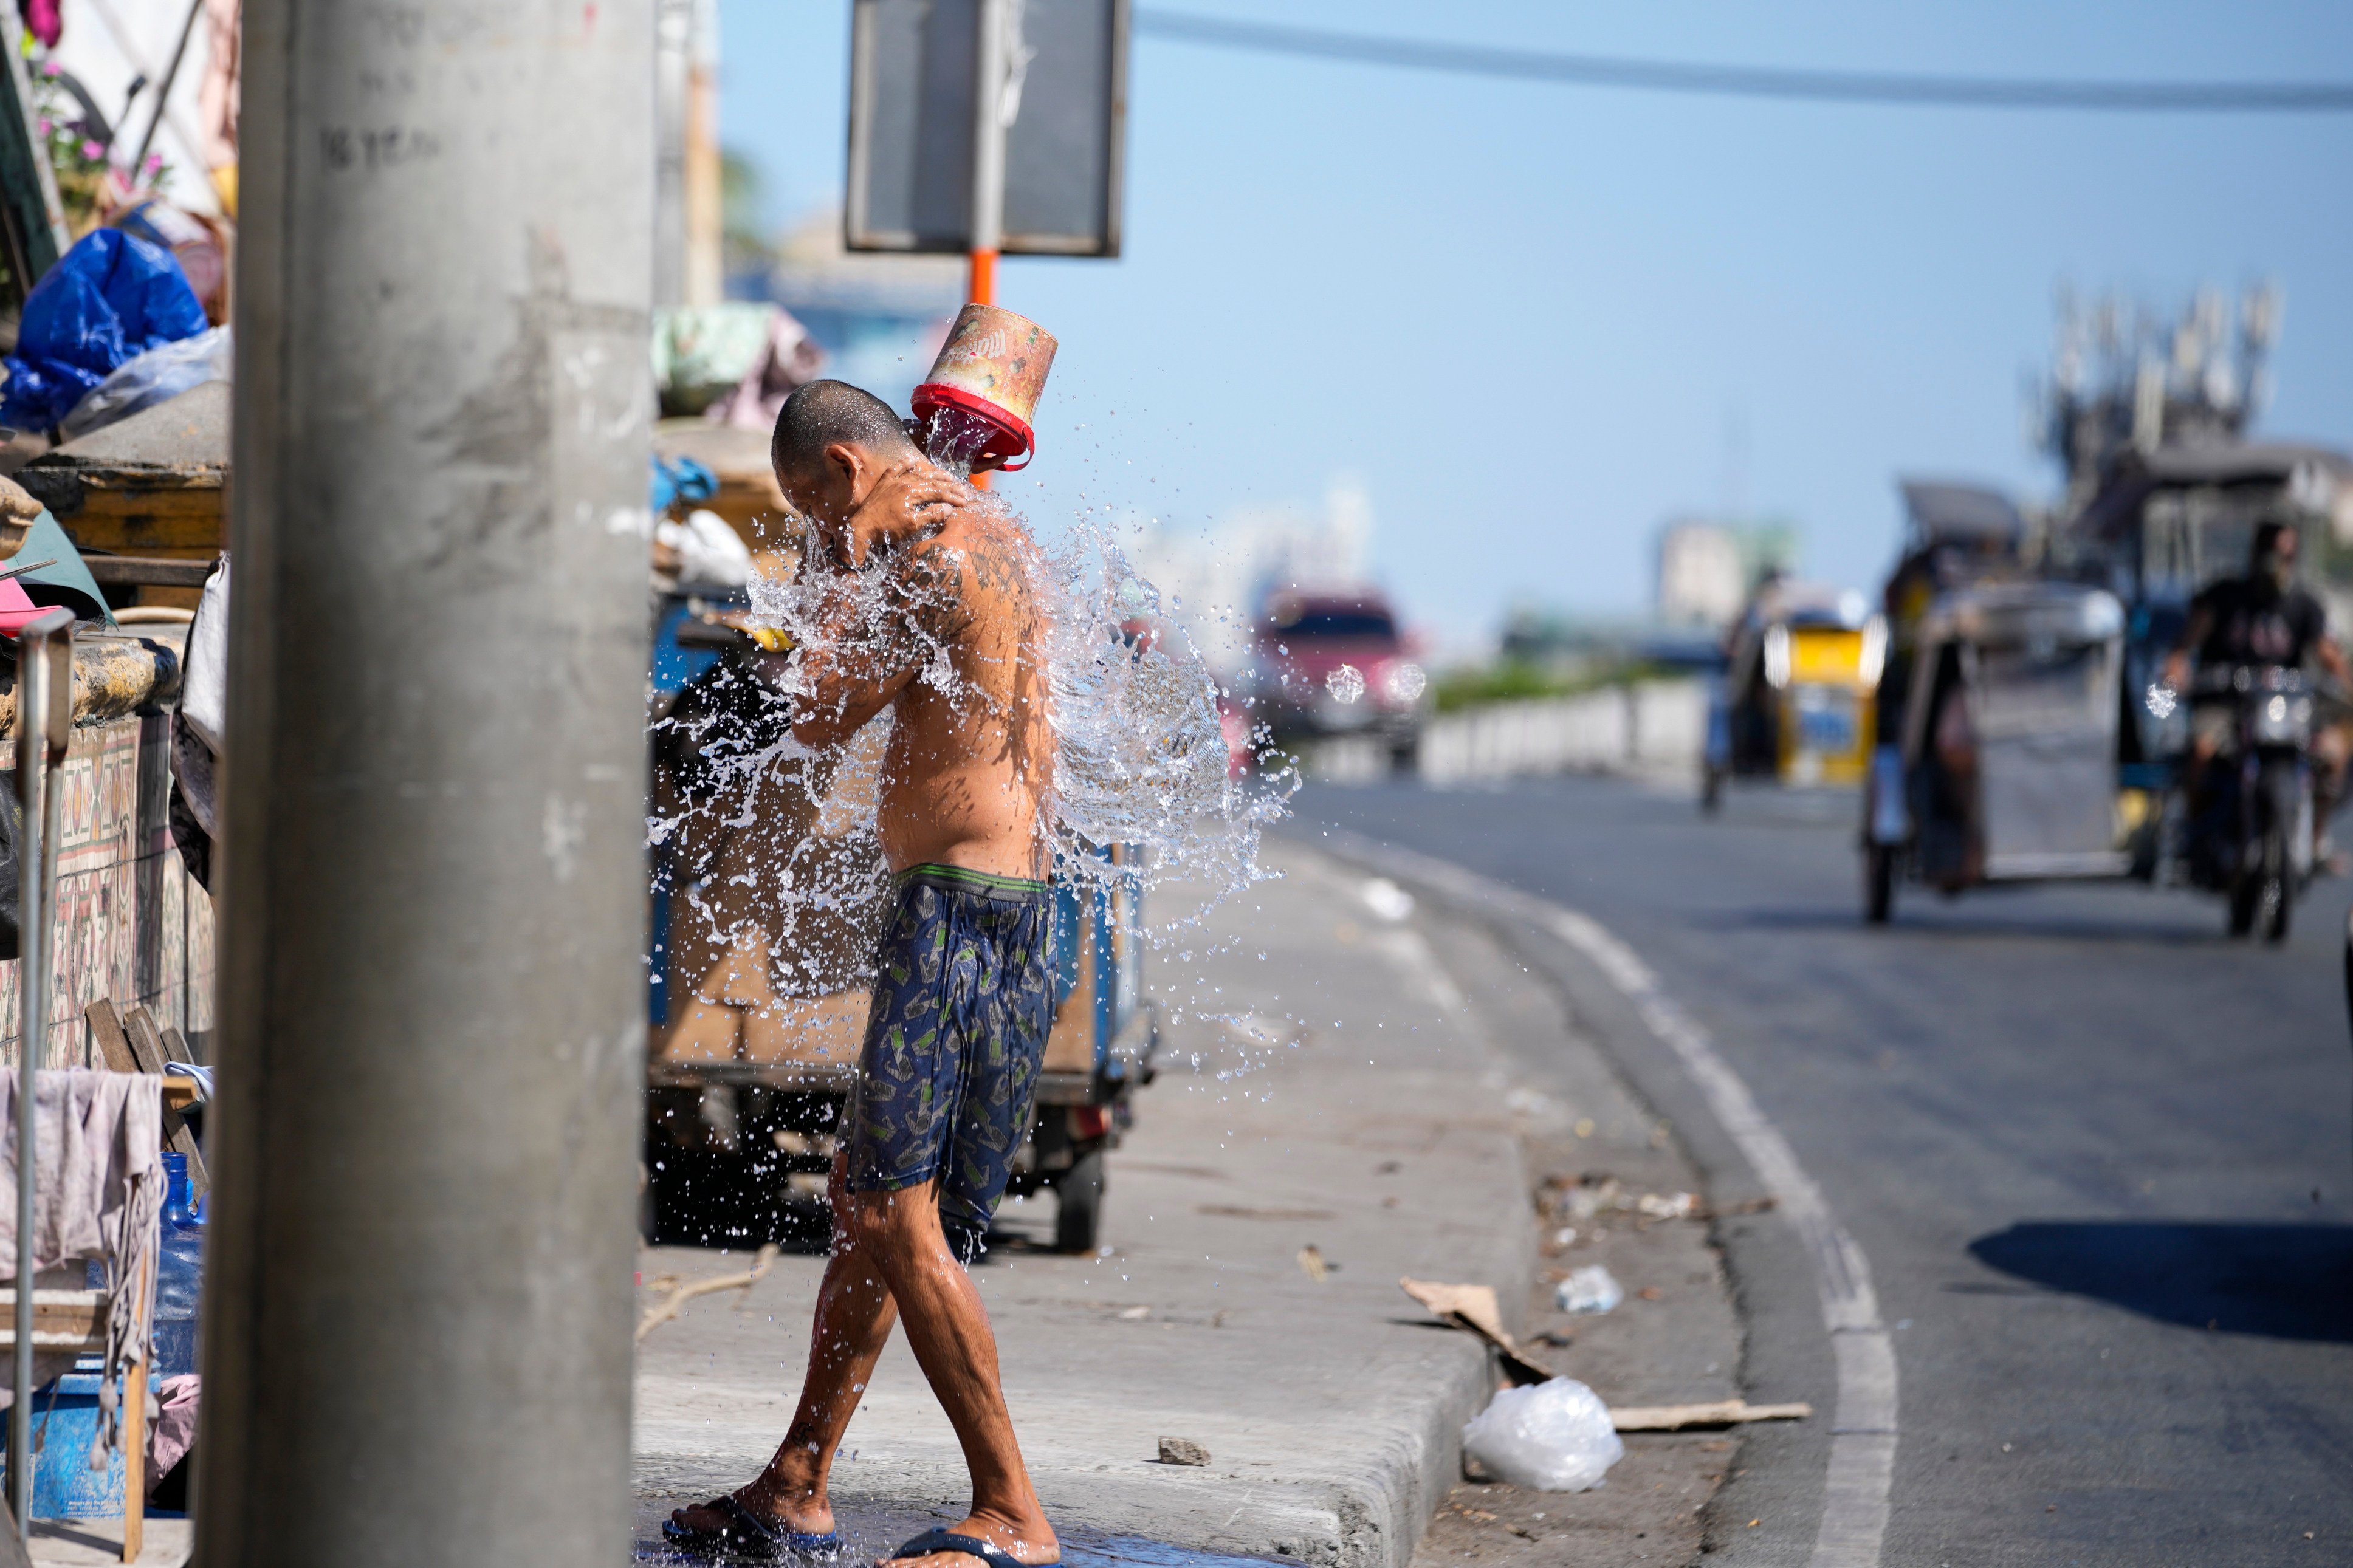 A man cools off in Manila in the Philippines. Parts of the country are experiencing extremely hot weather. Photo: AP